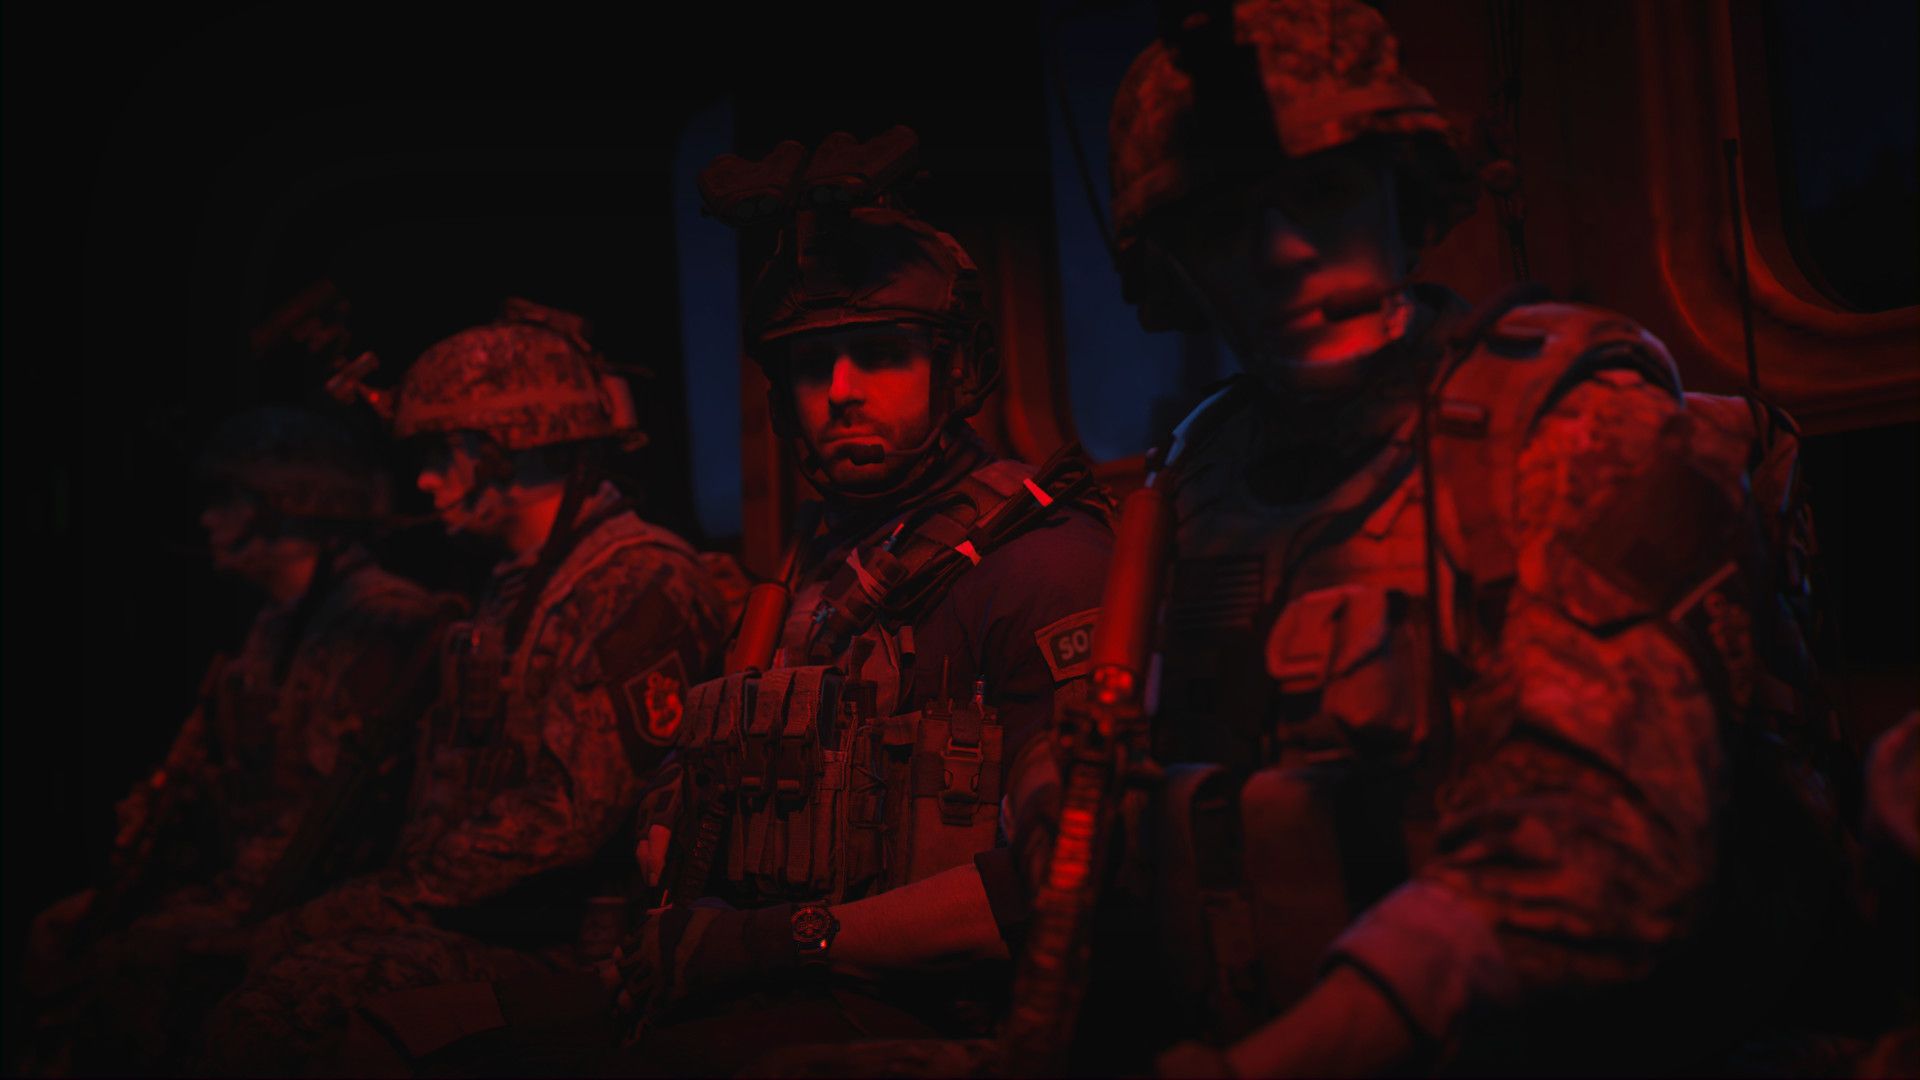 Video game screenshot of soldiers sitting in a helicopter under a red light